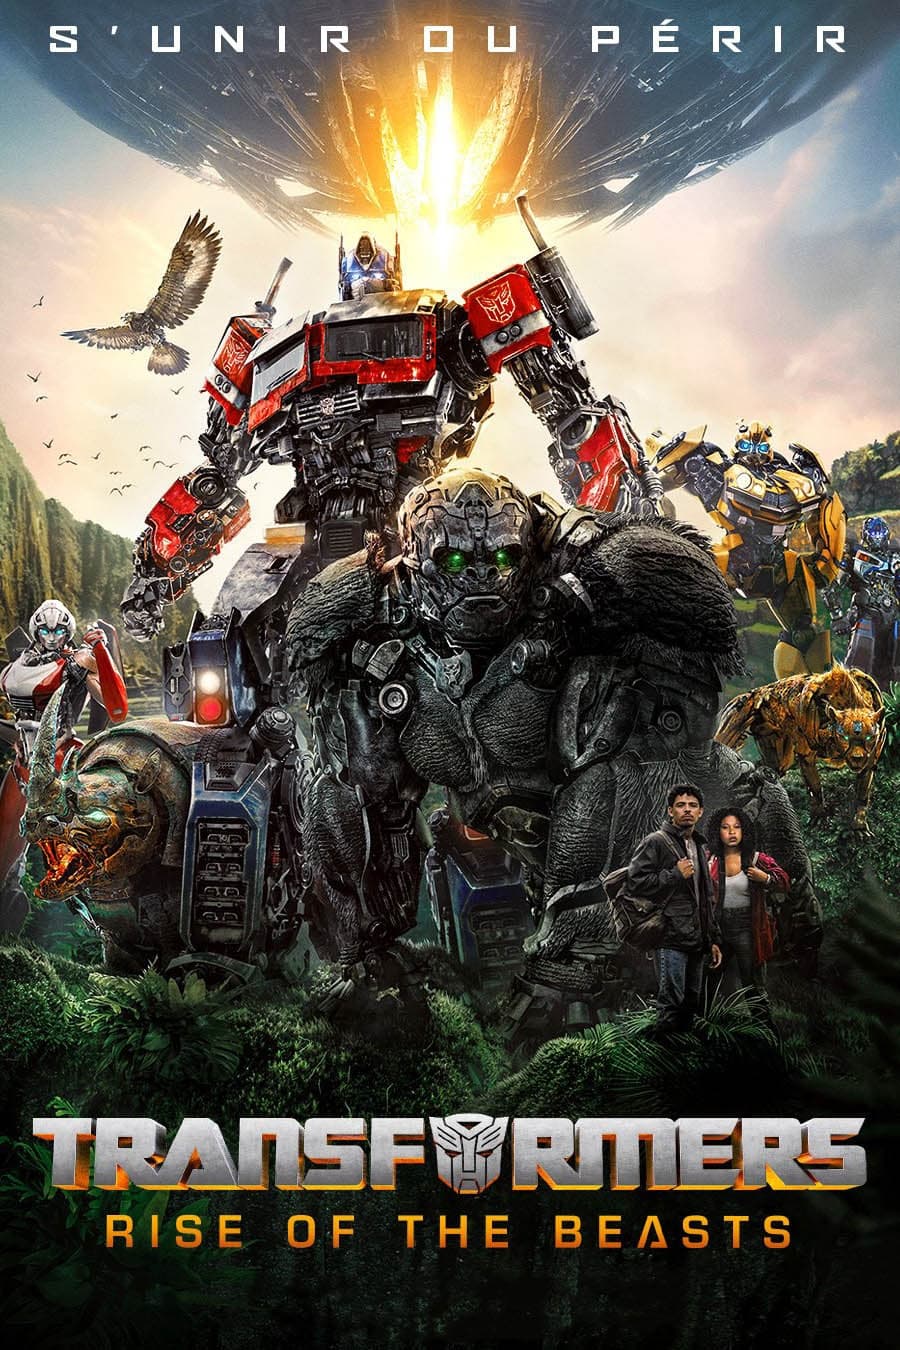 Affiche du film "Transformers: Rise of the Beasts"